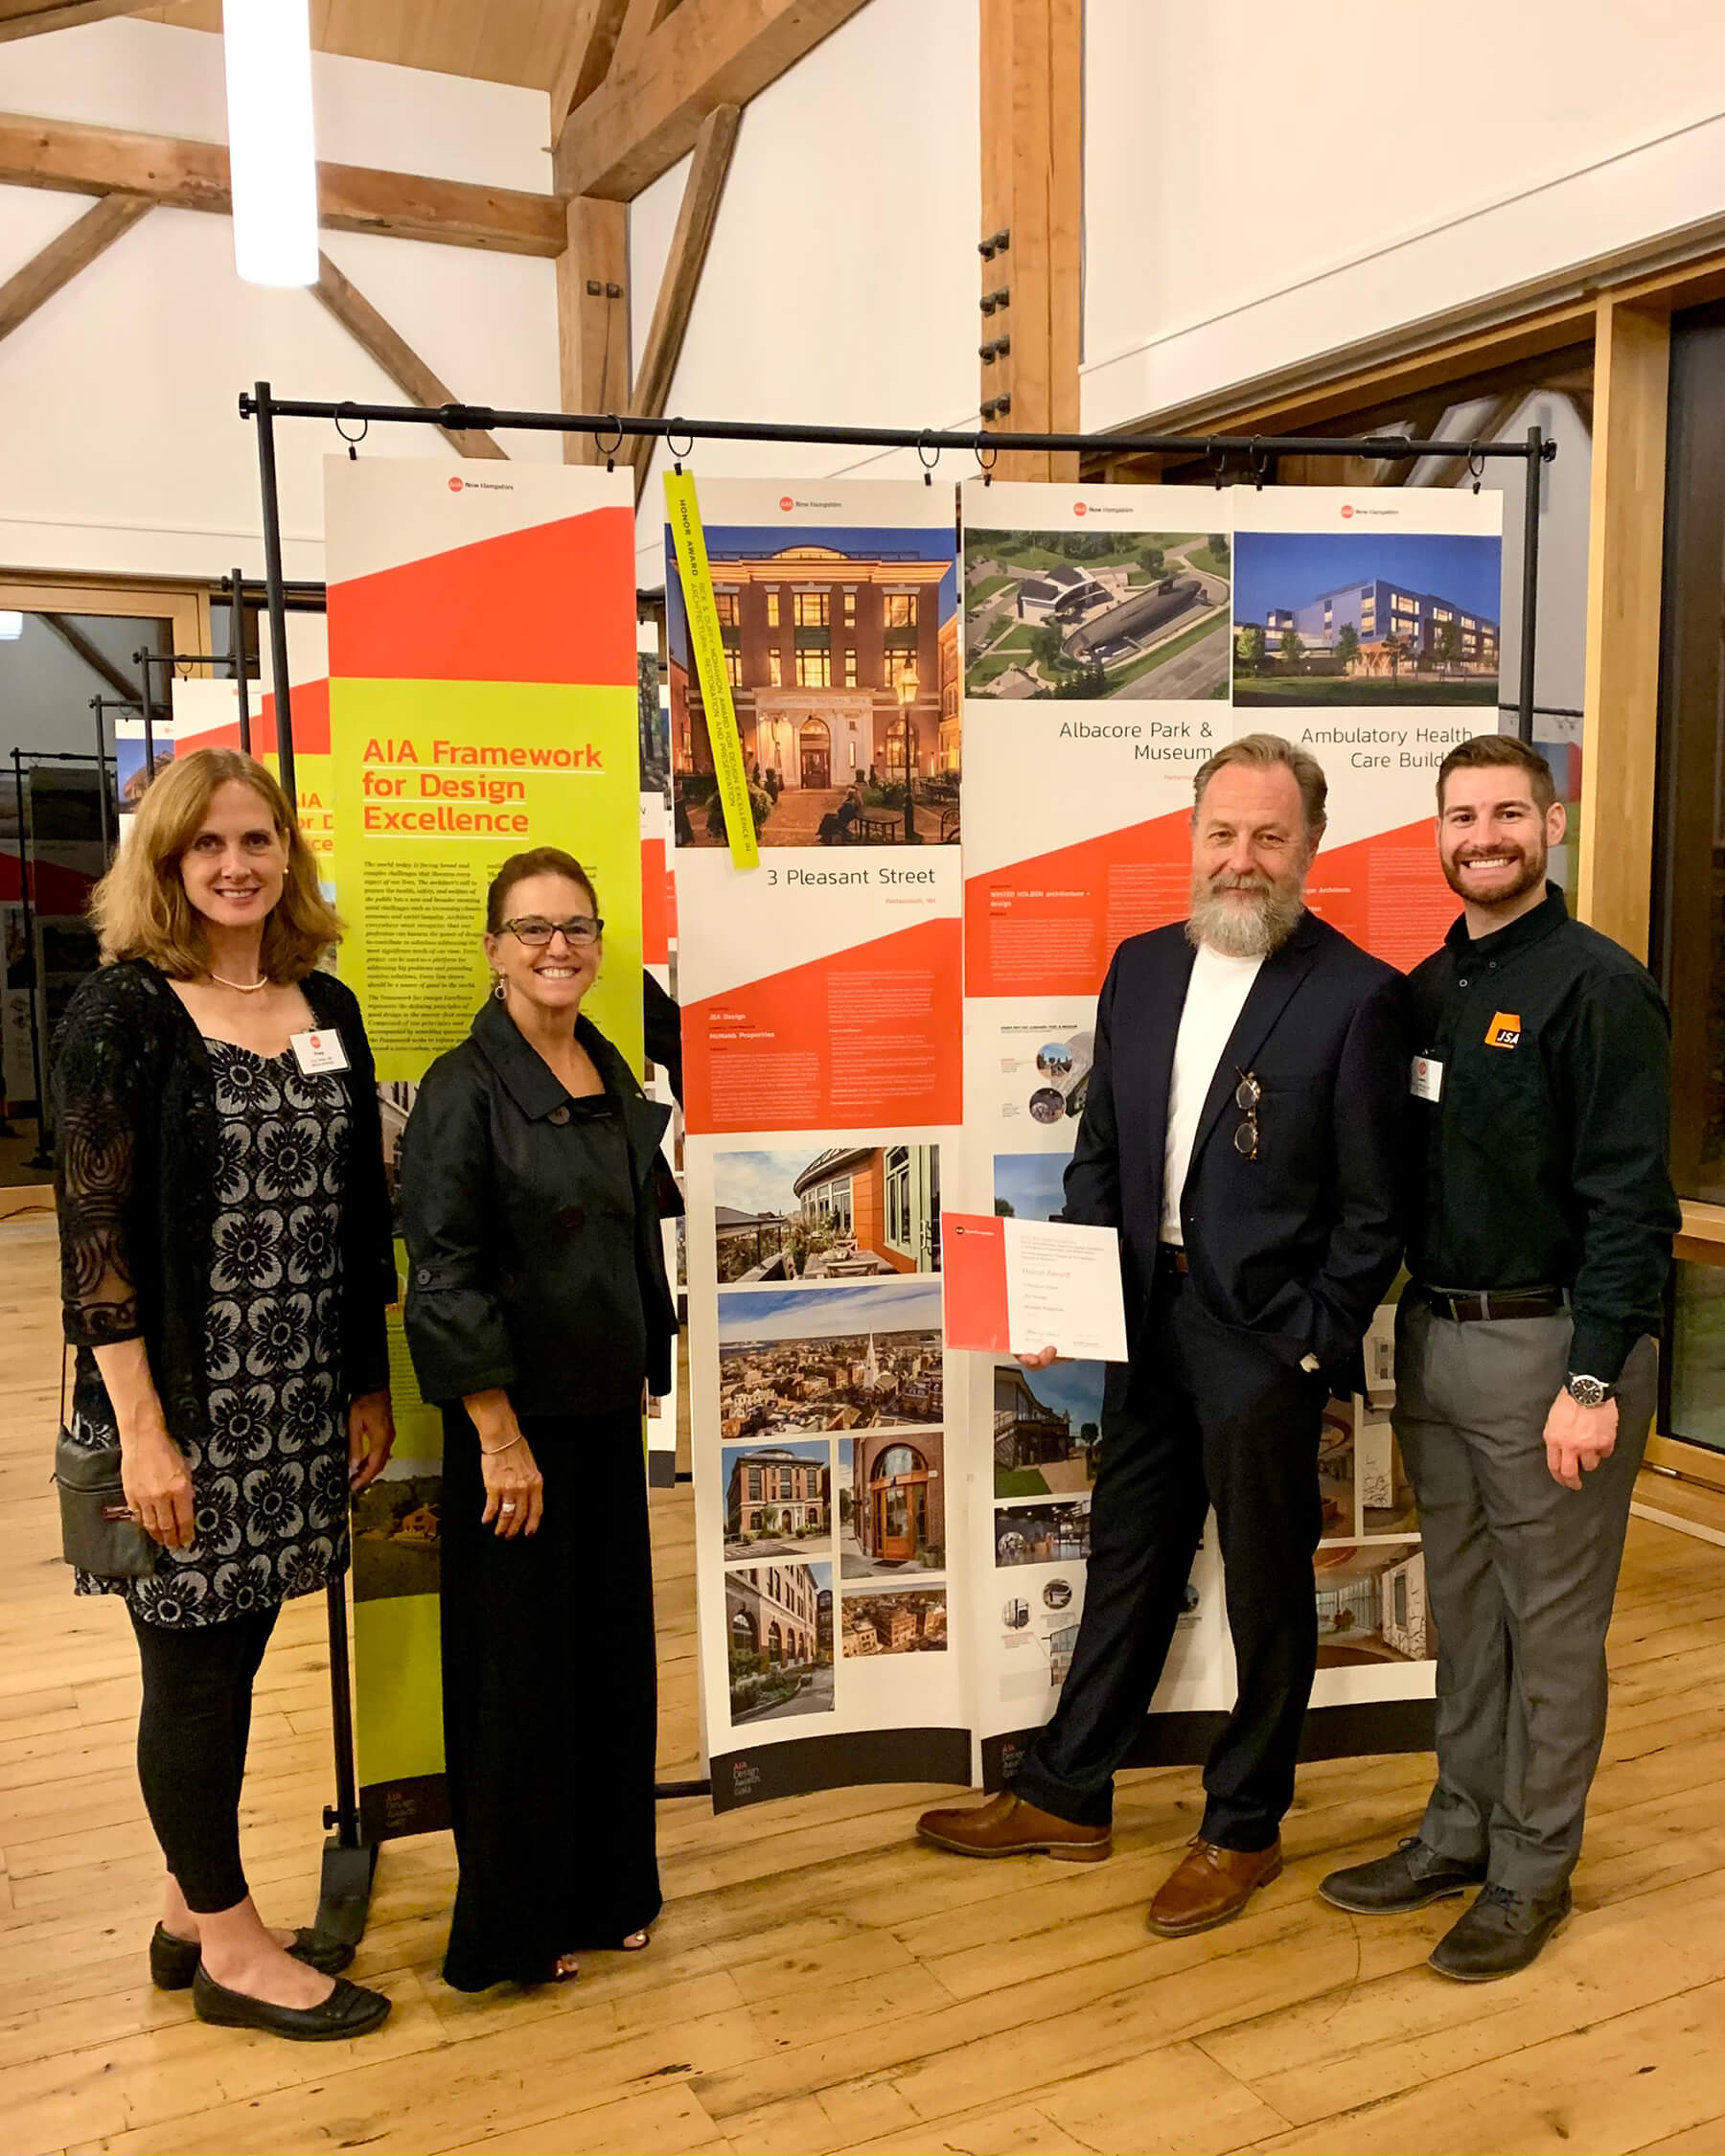 A group of four people (two men and two women) stand next to a presentation exhibition board. They are at an architecture awards event.